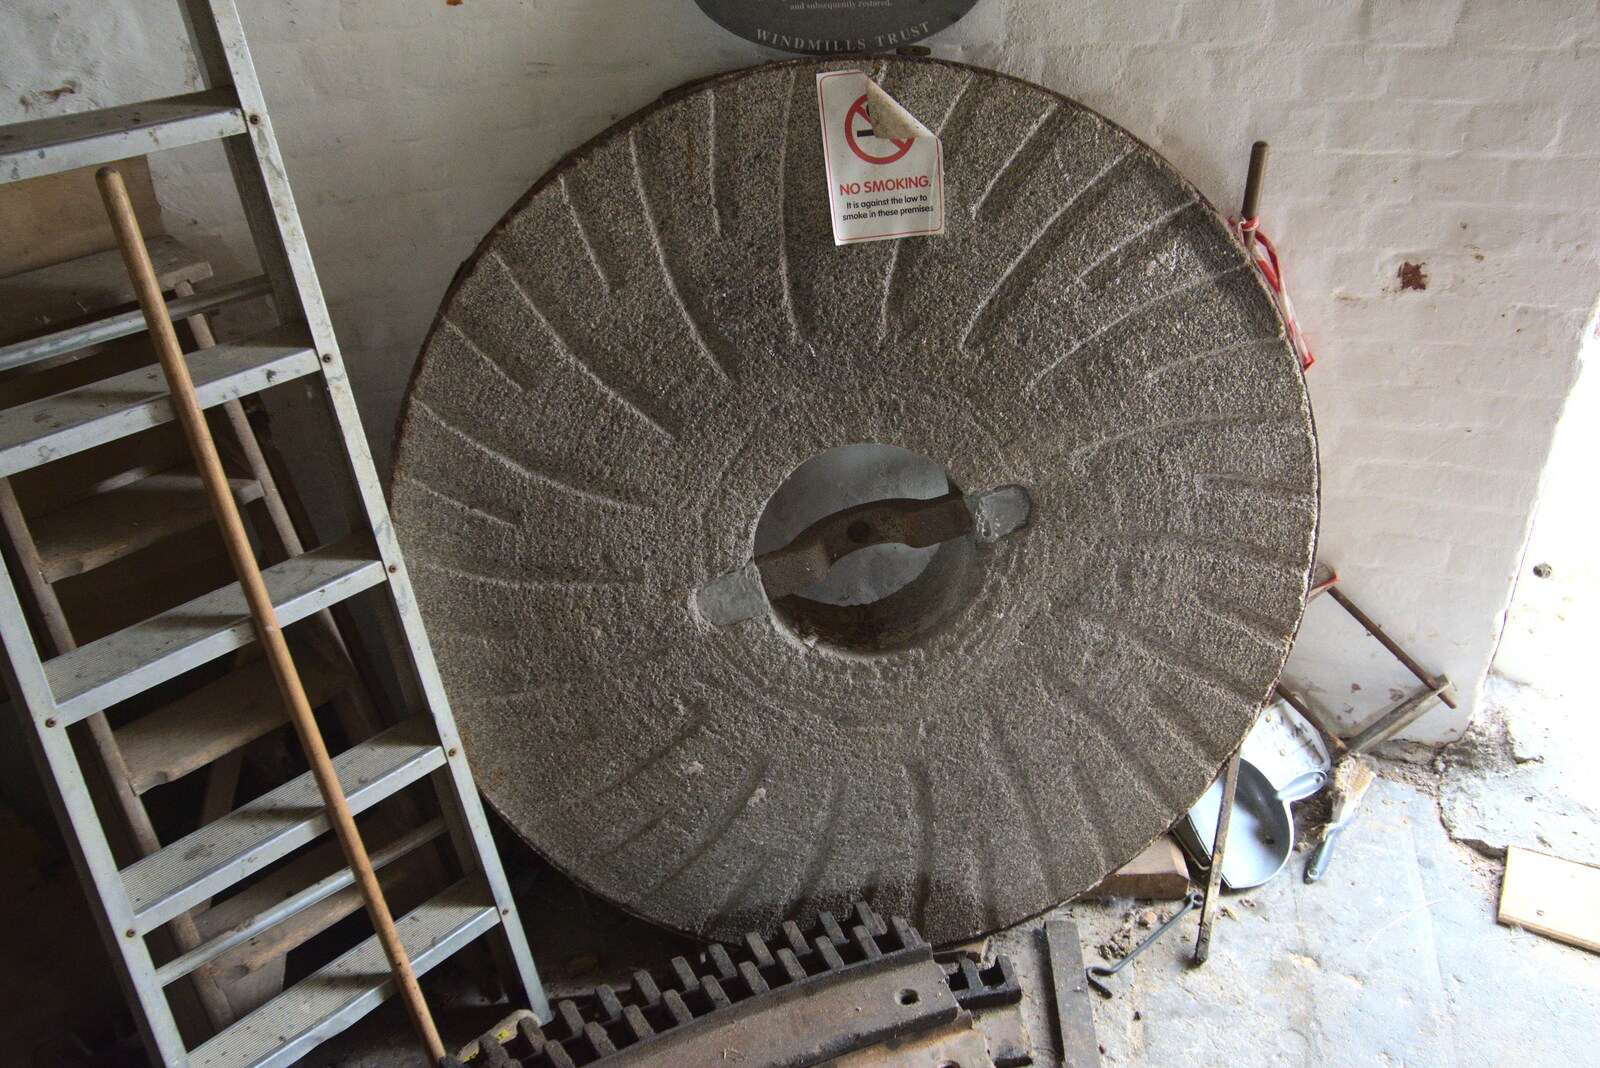 A spare millstone from An Open Day at the Windmill, Billingford, Norfolk - 21st August 2021